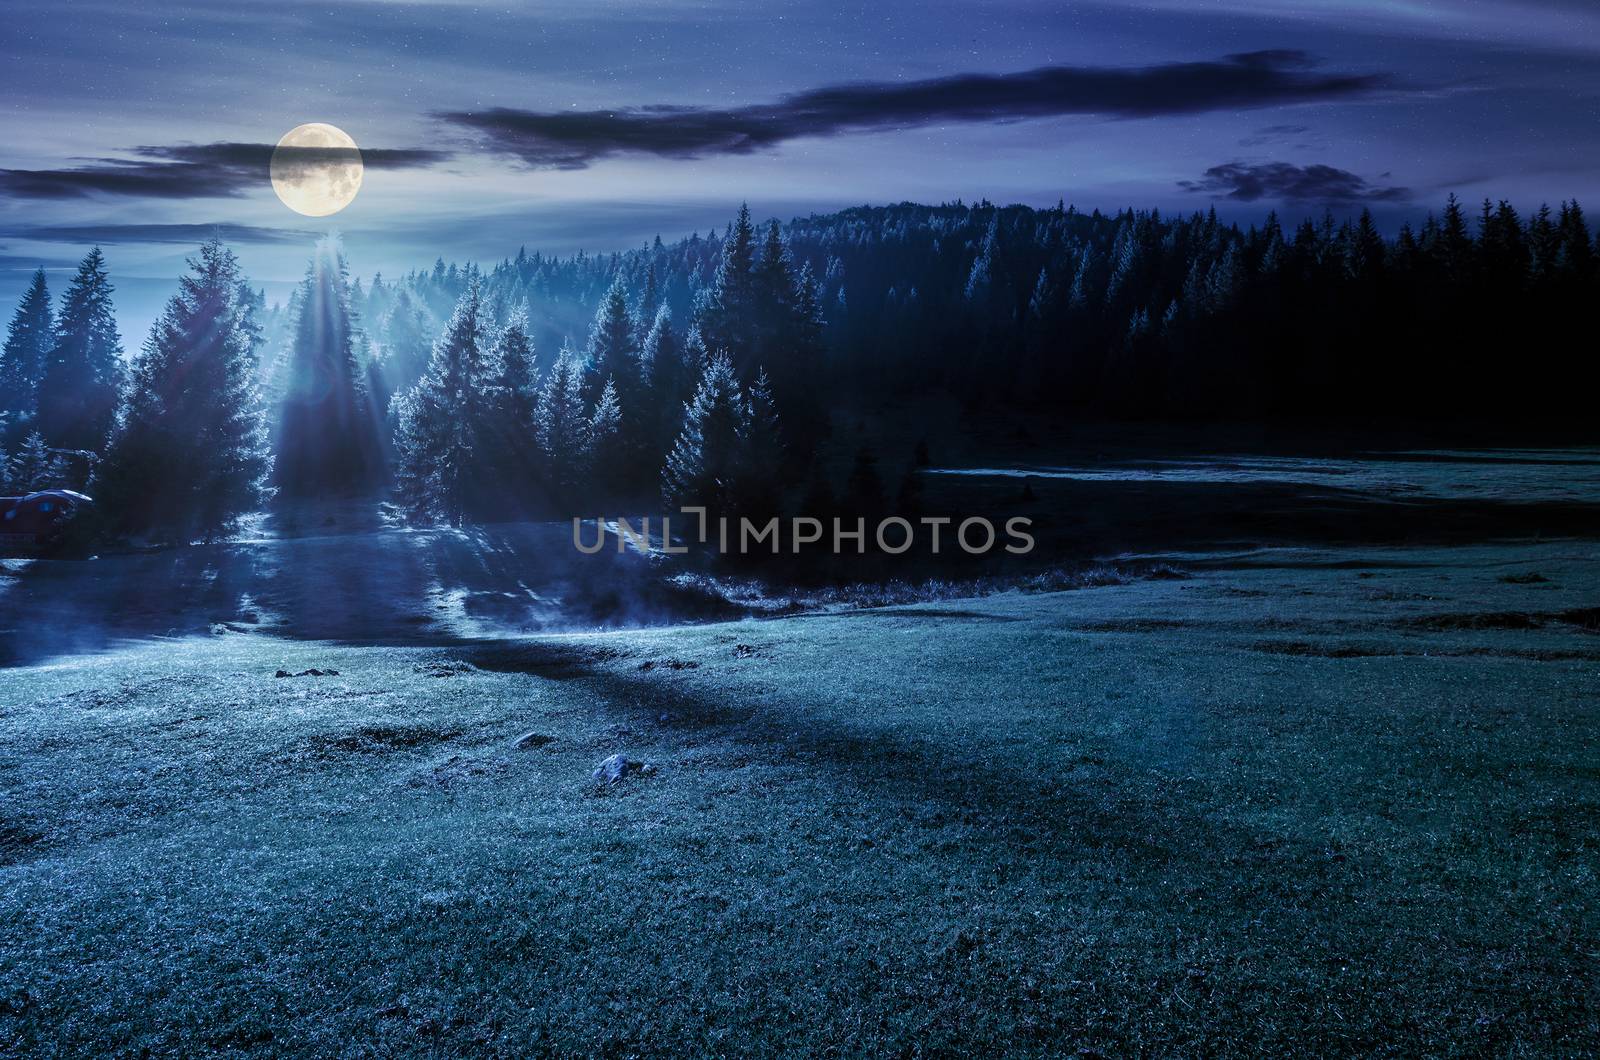 forest on grassy meadow at foggy night in full moon light. lovely nature scenery with forested hill in the distance